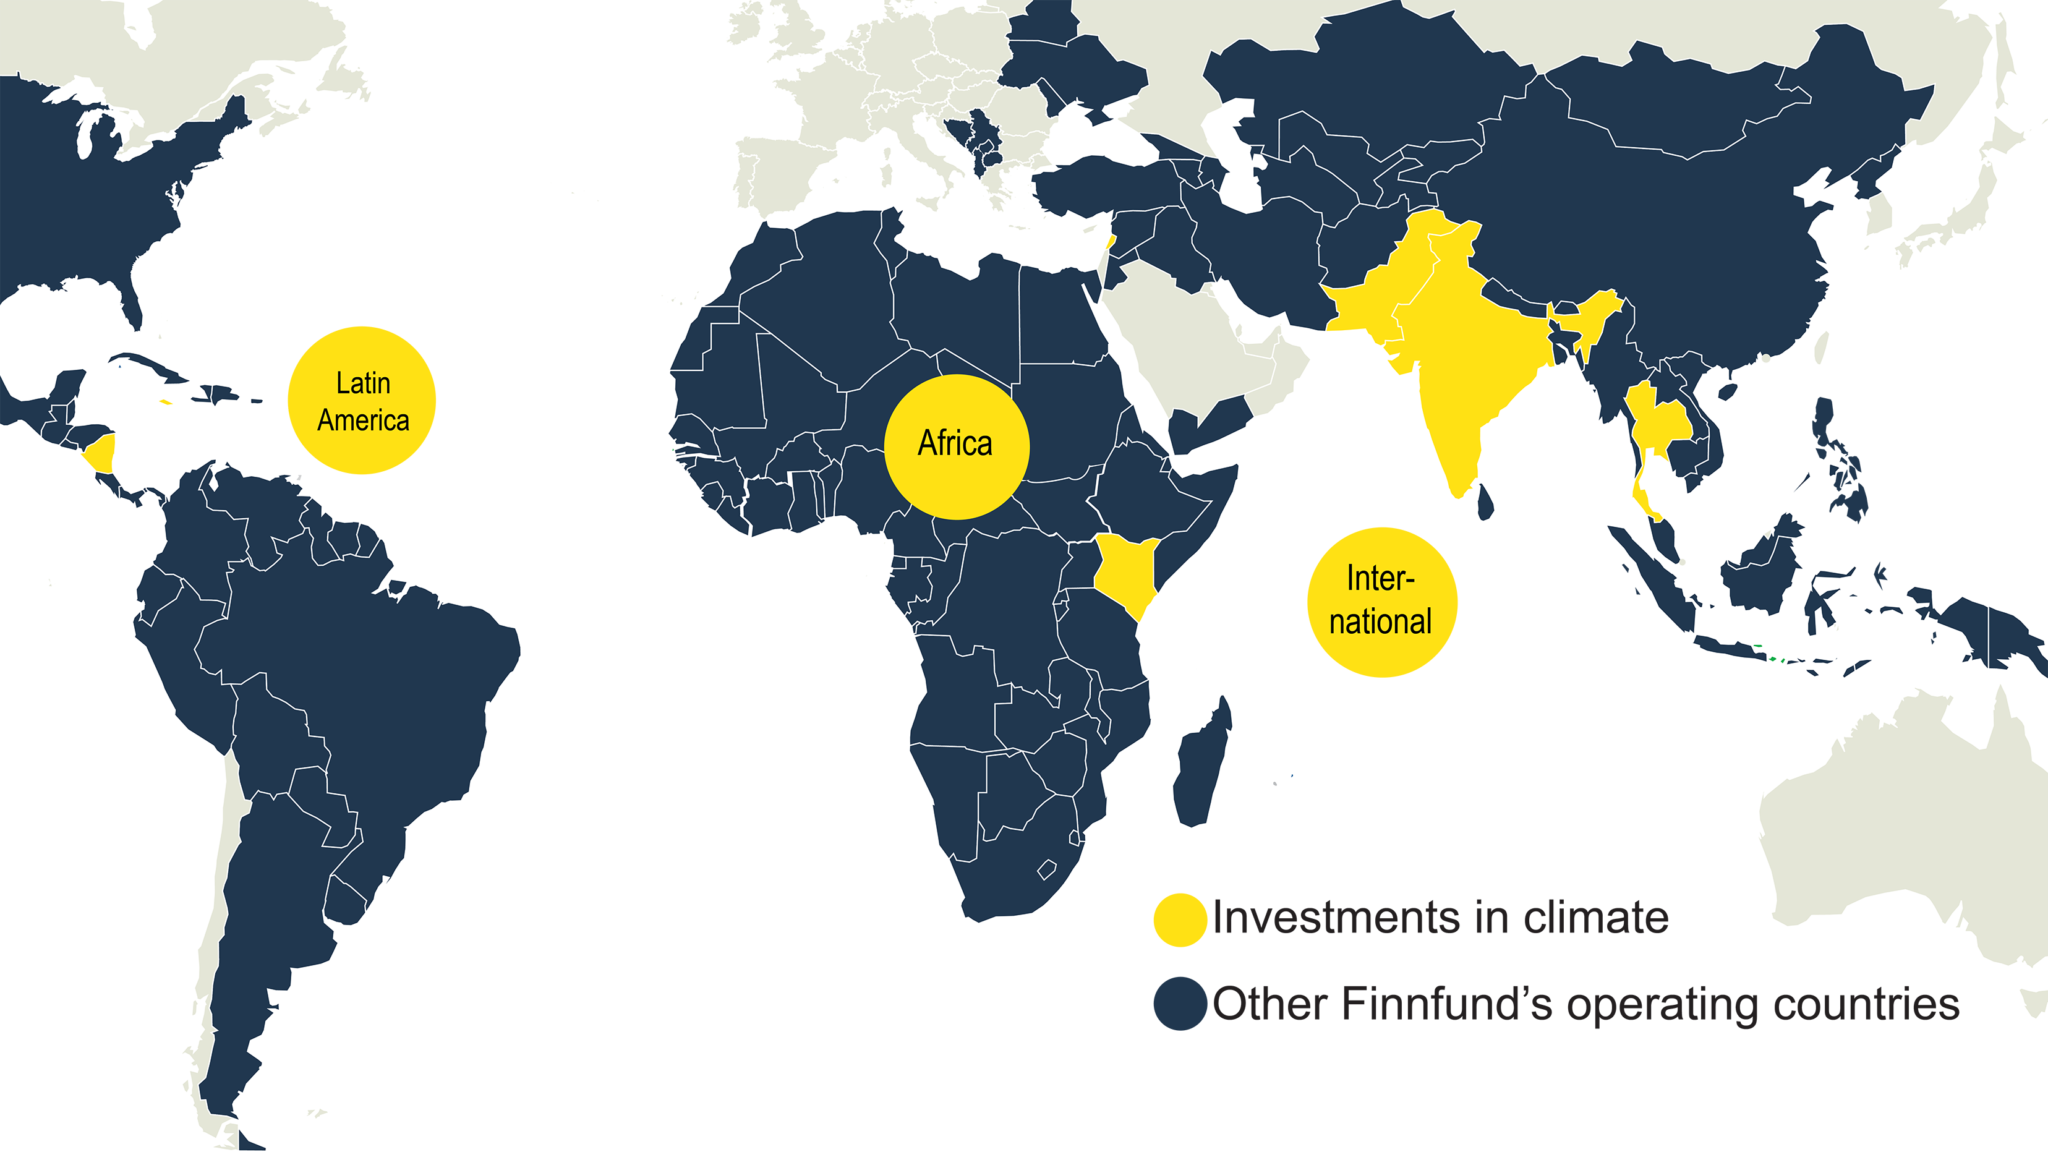 Finnfund's climate investments on a map